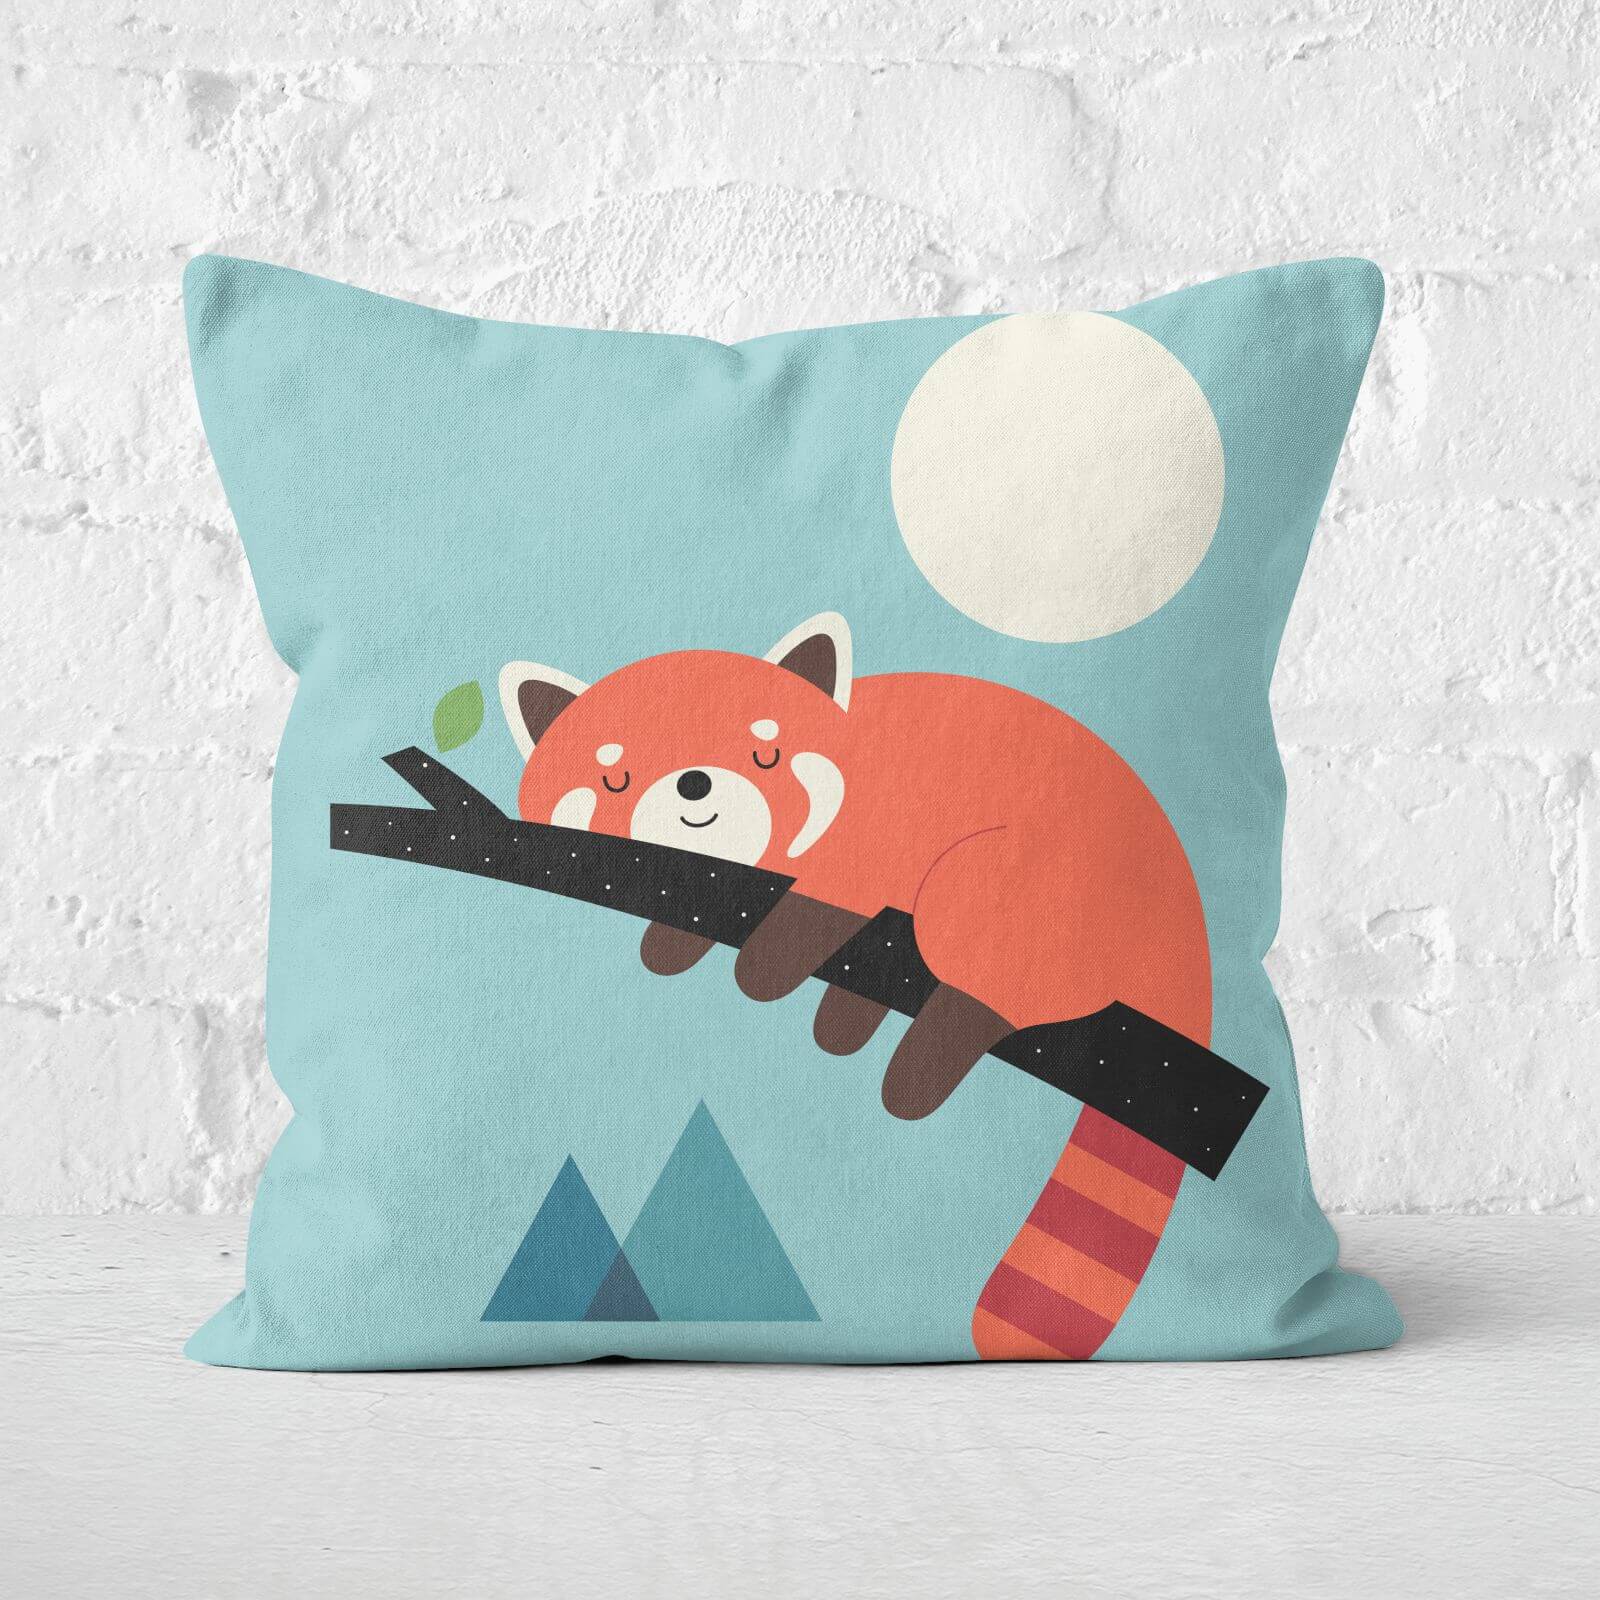 Andy Westface Nap Time Square Cushion - 60x60cm - Soft Touch